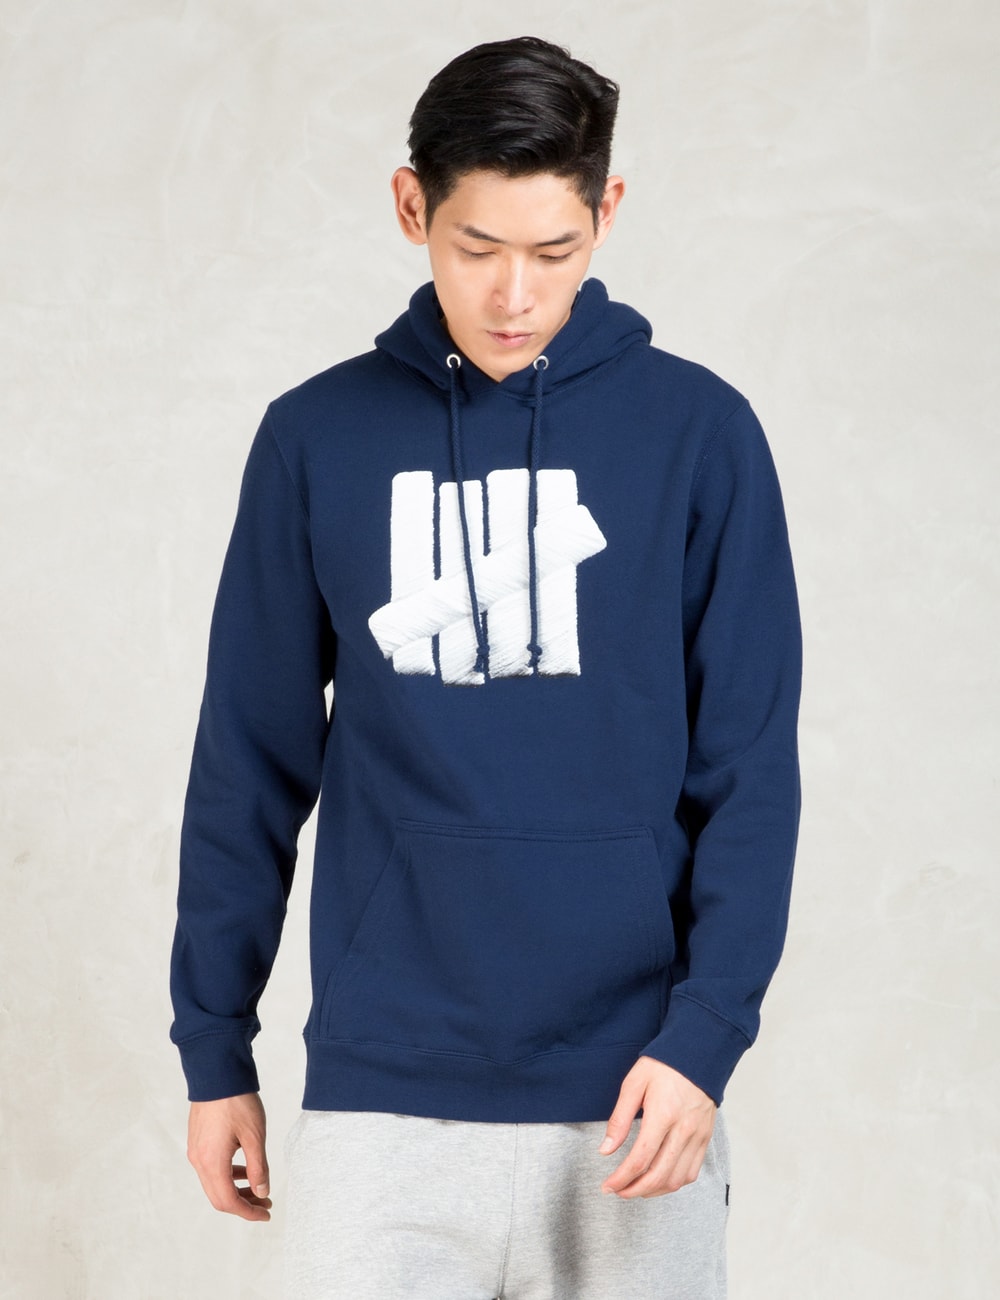 Undefeated - Navy Embroidery Strike Hoodie | HBX